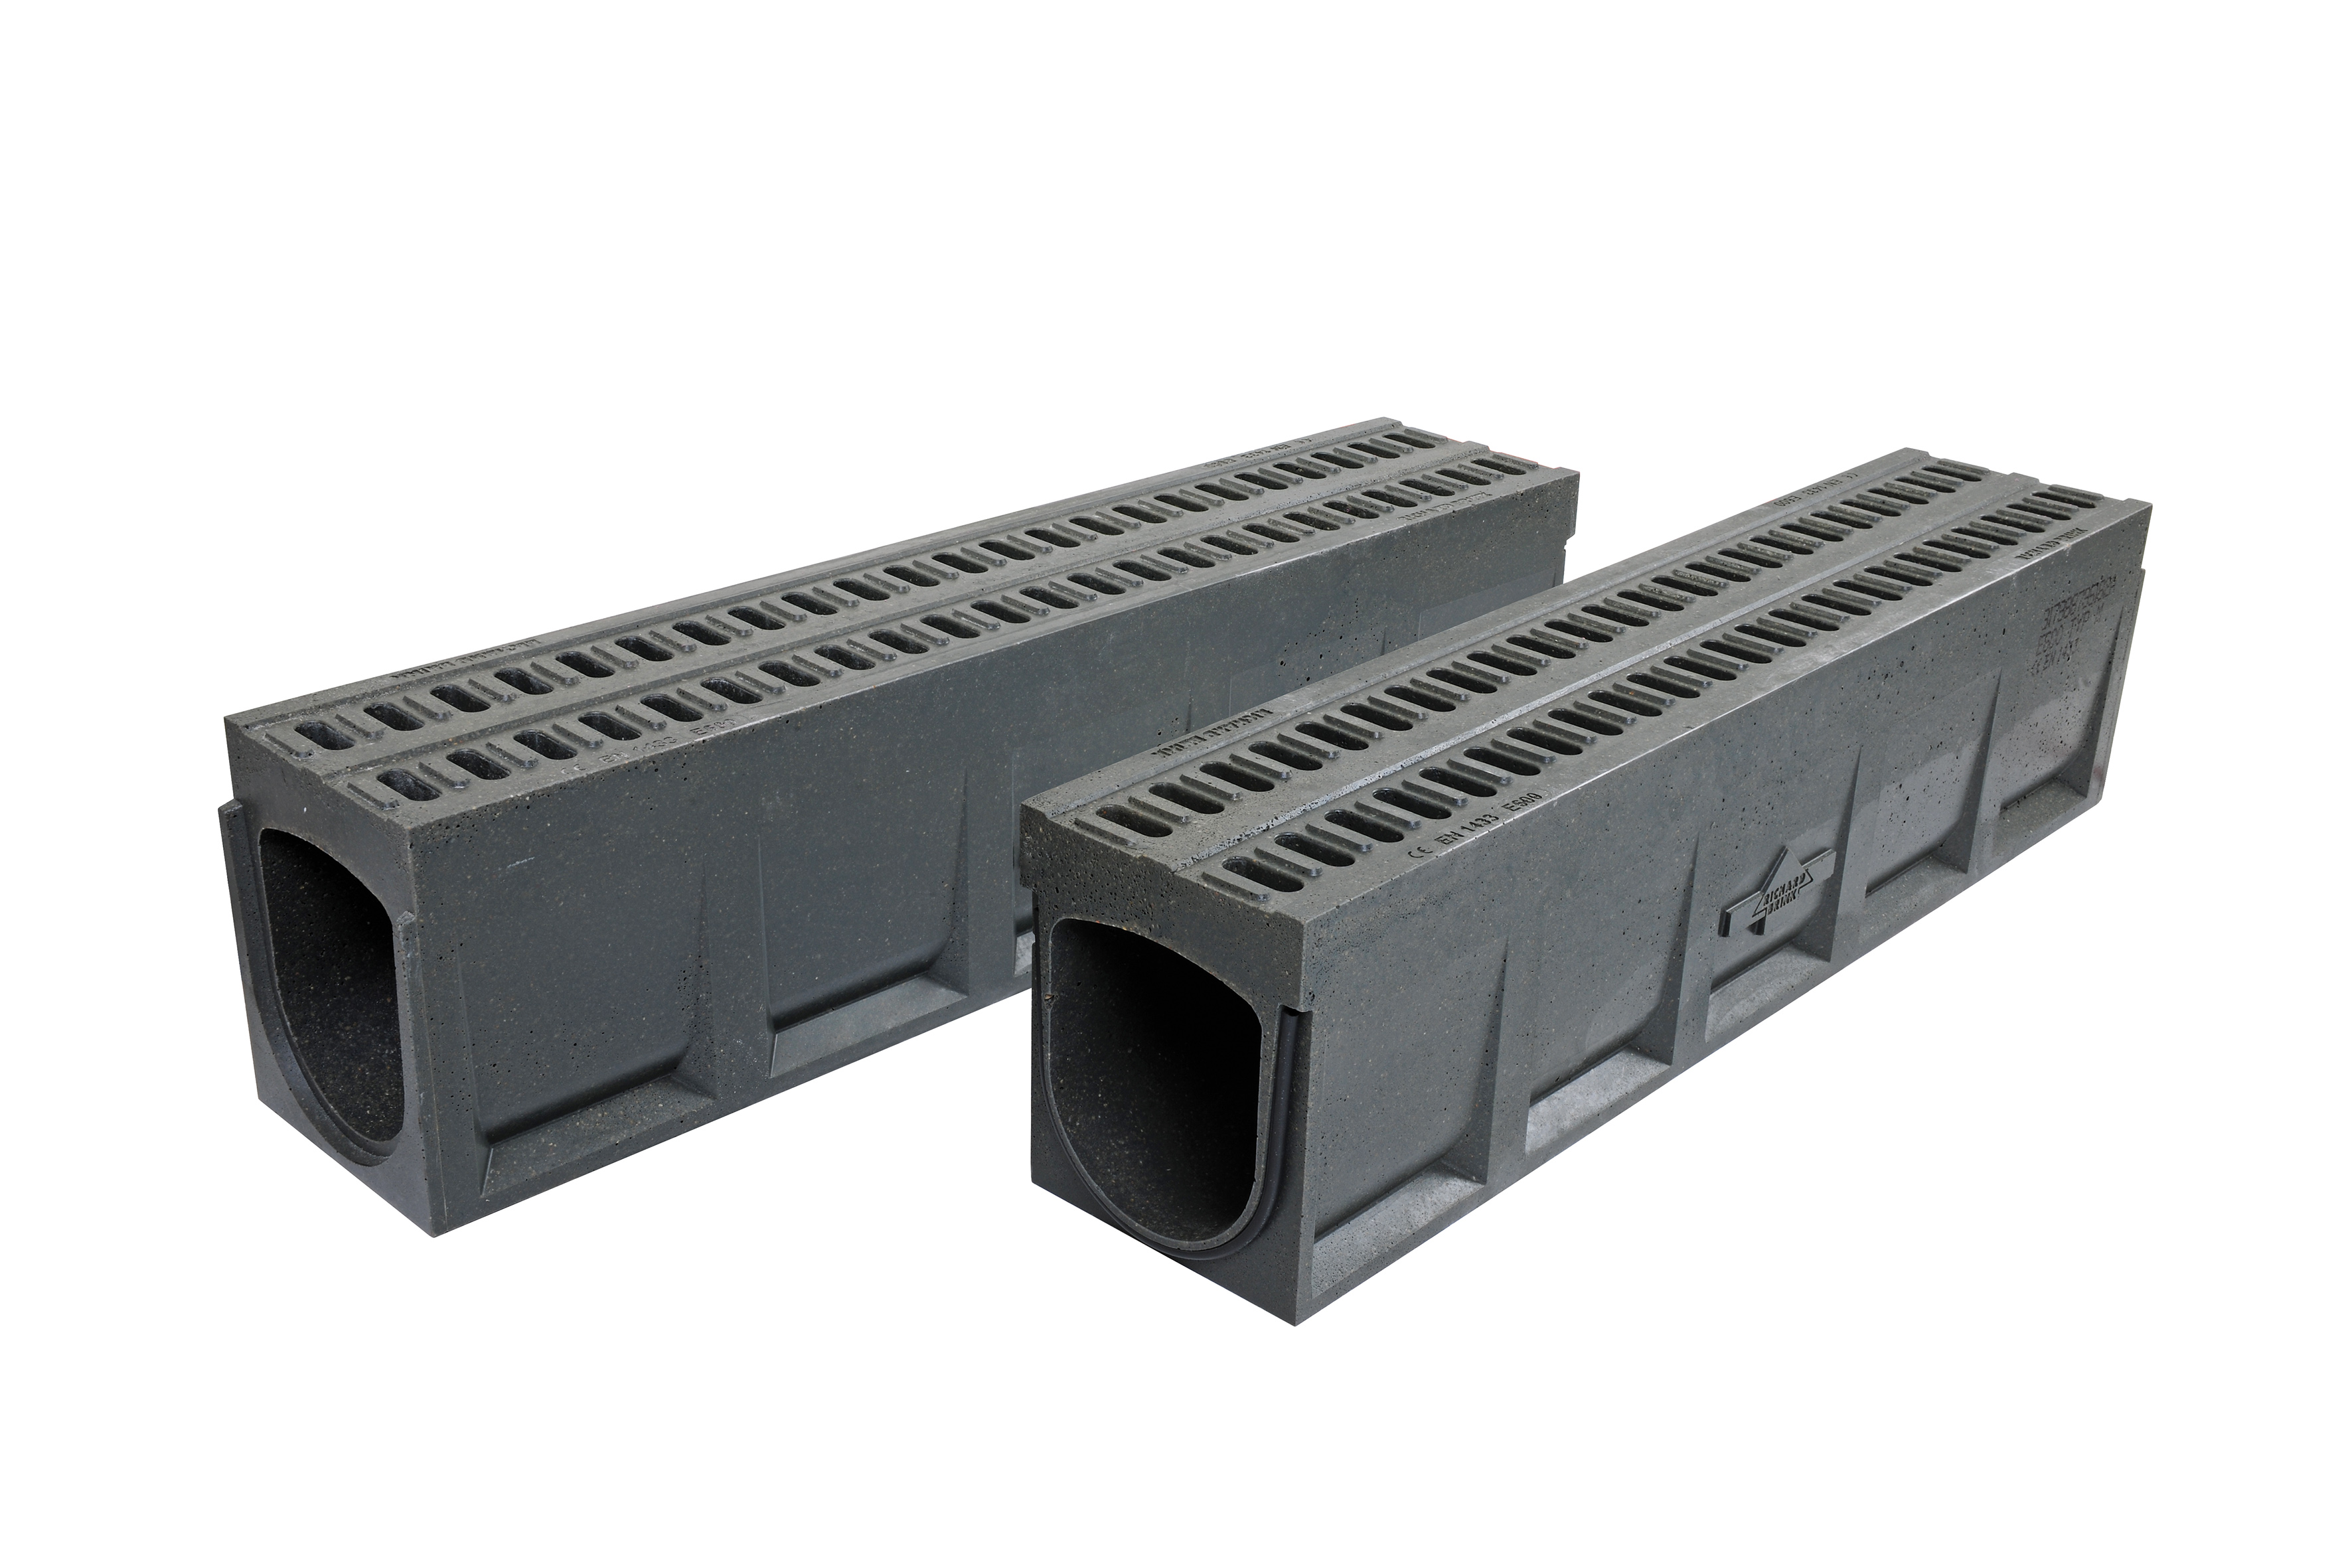 The new polymer concrete product from the metal products manufacturer combines the channel body and grating in one monolithic component. A nut-and-groove system with integrated rubber seals ensures a watertight transition at the channel joints.